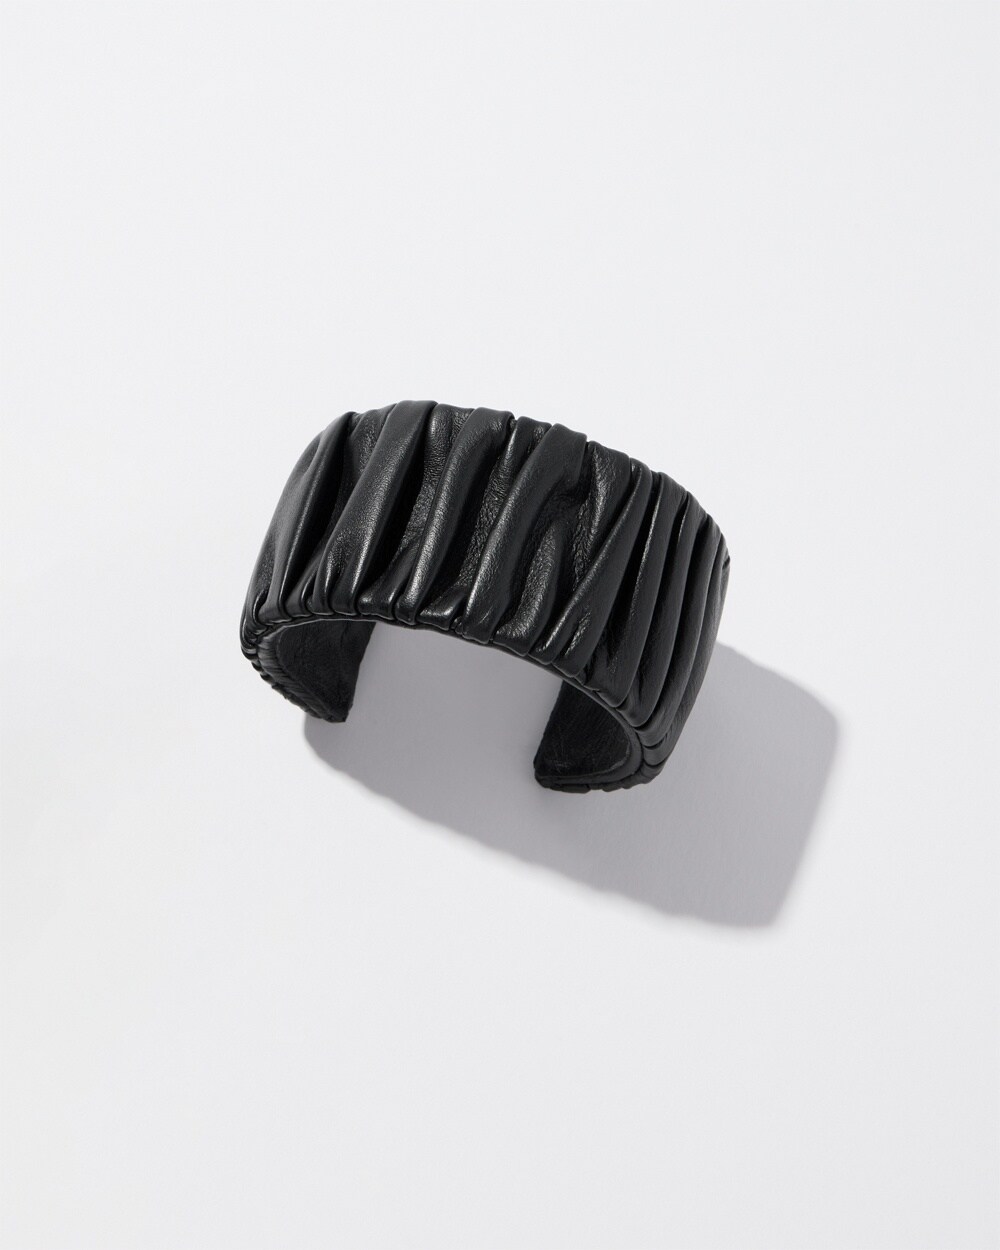 Black Braided O Ring Leather Bracelet - LuckySevenleather